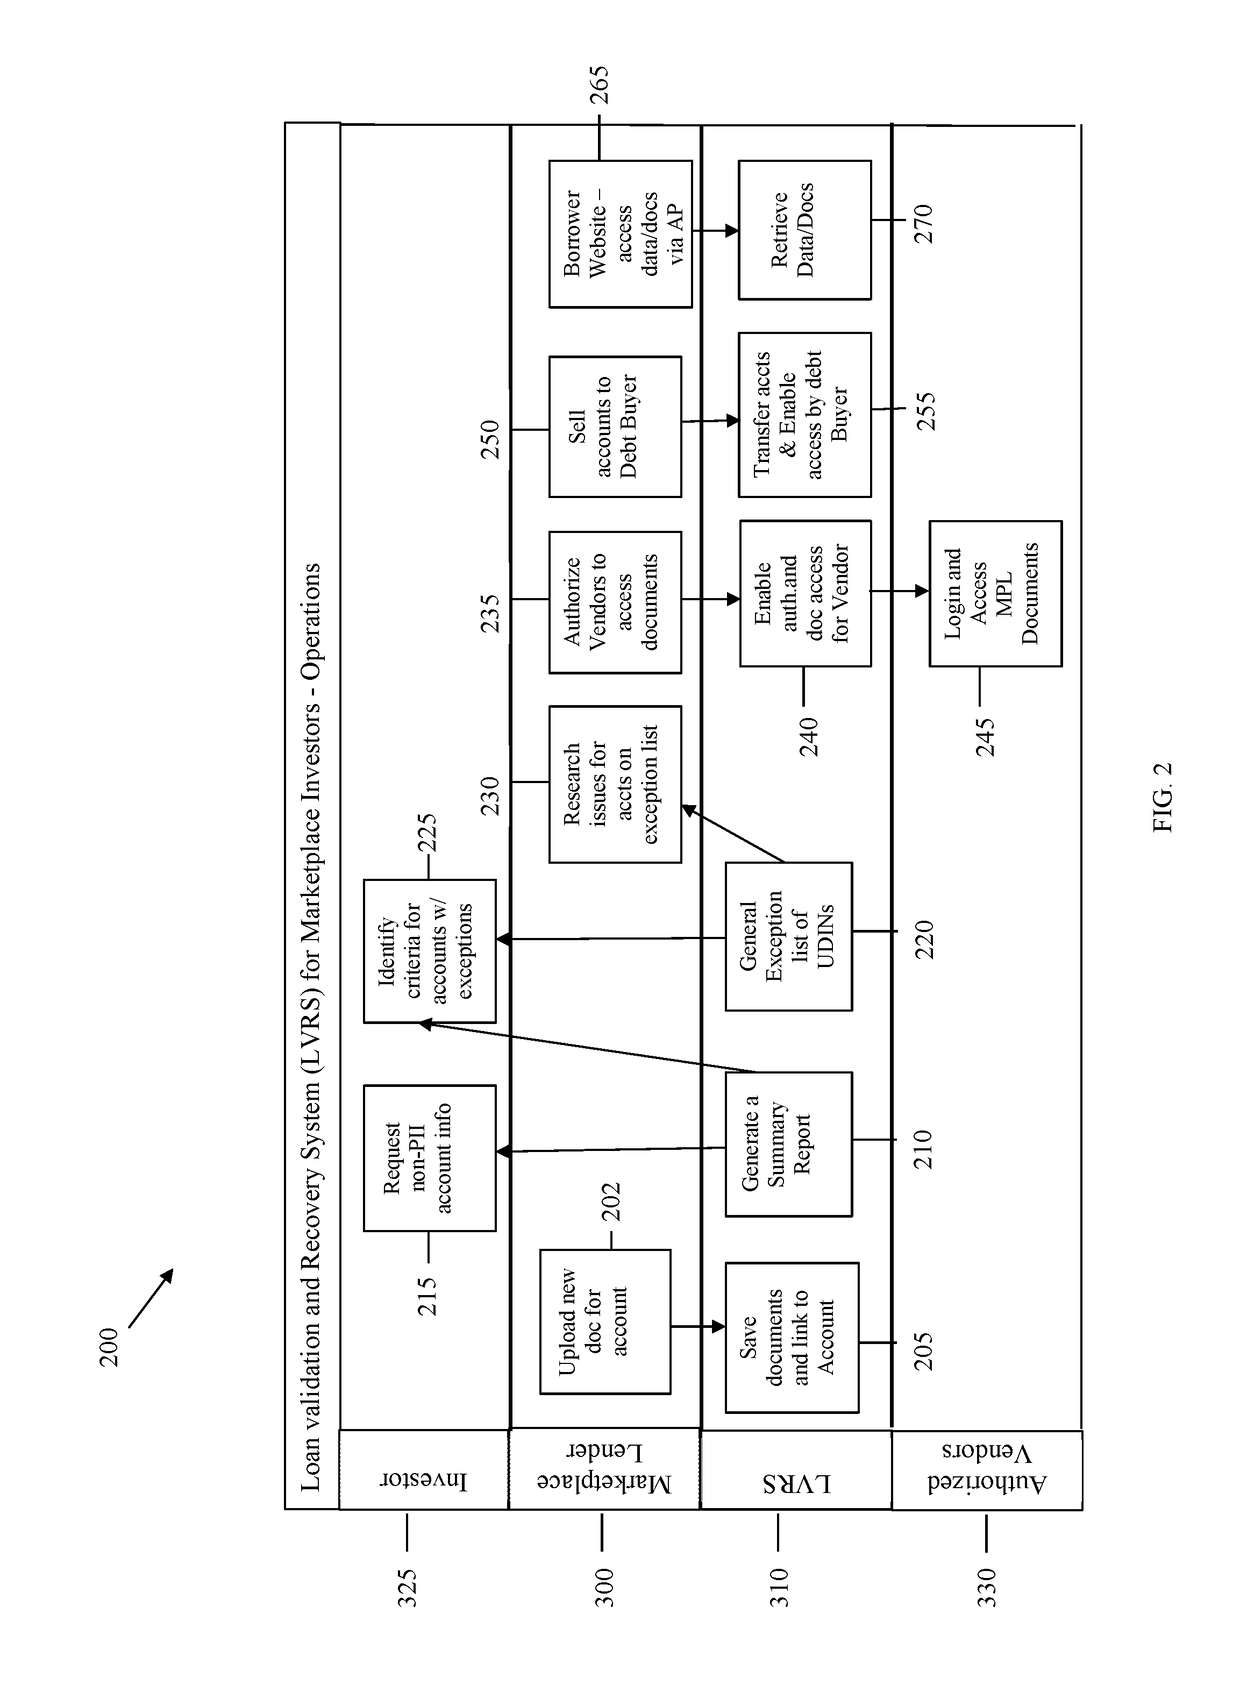 System and method for loan validation and recovery system for marketplace investors